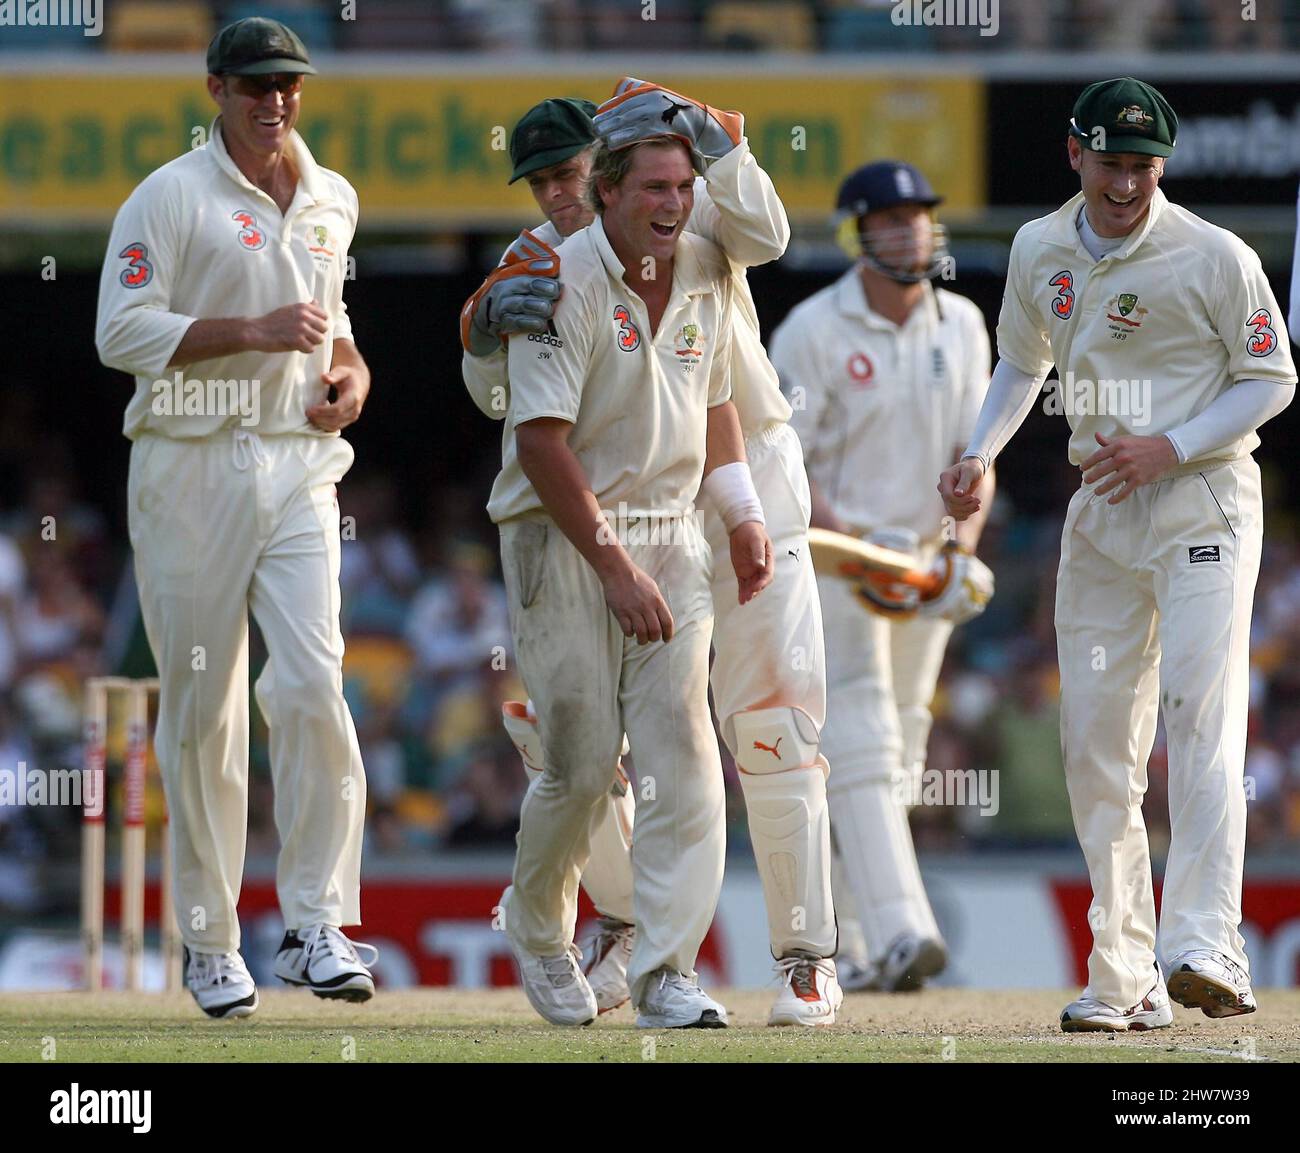 File photo dated 26-11-2006 of Australia's Shane Warne celebrates with Adam Gilchrist (behind) after taking the wicket of England captain Andrew Flintoff during the fourth day of the first Test match at the Gabba, Brisbane, Australia. Former Australia cricketer Shane Warne has died at the age of 52, his management company MPC Entertainment has announced in a statement. Issue date: Friday March 4, 2022. Stock Photo